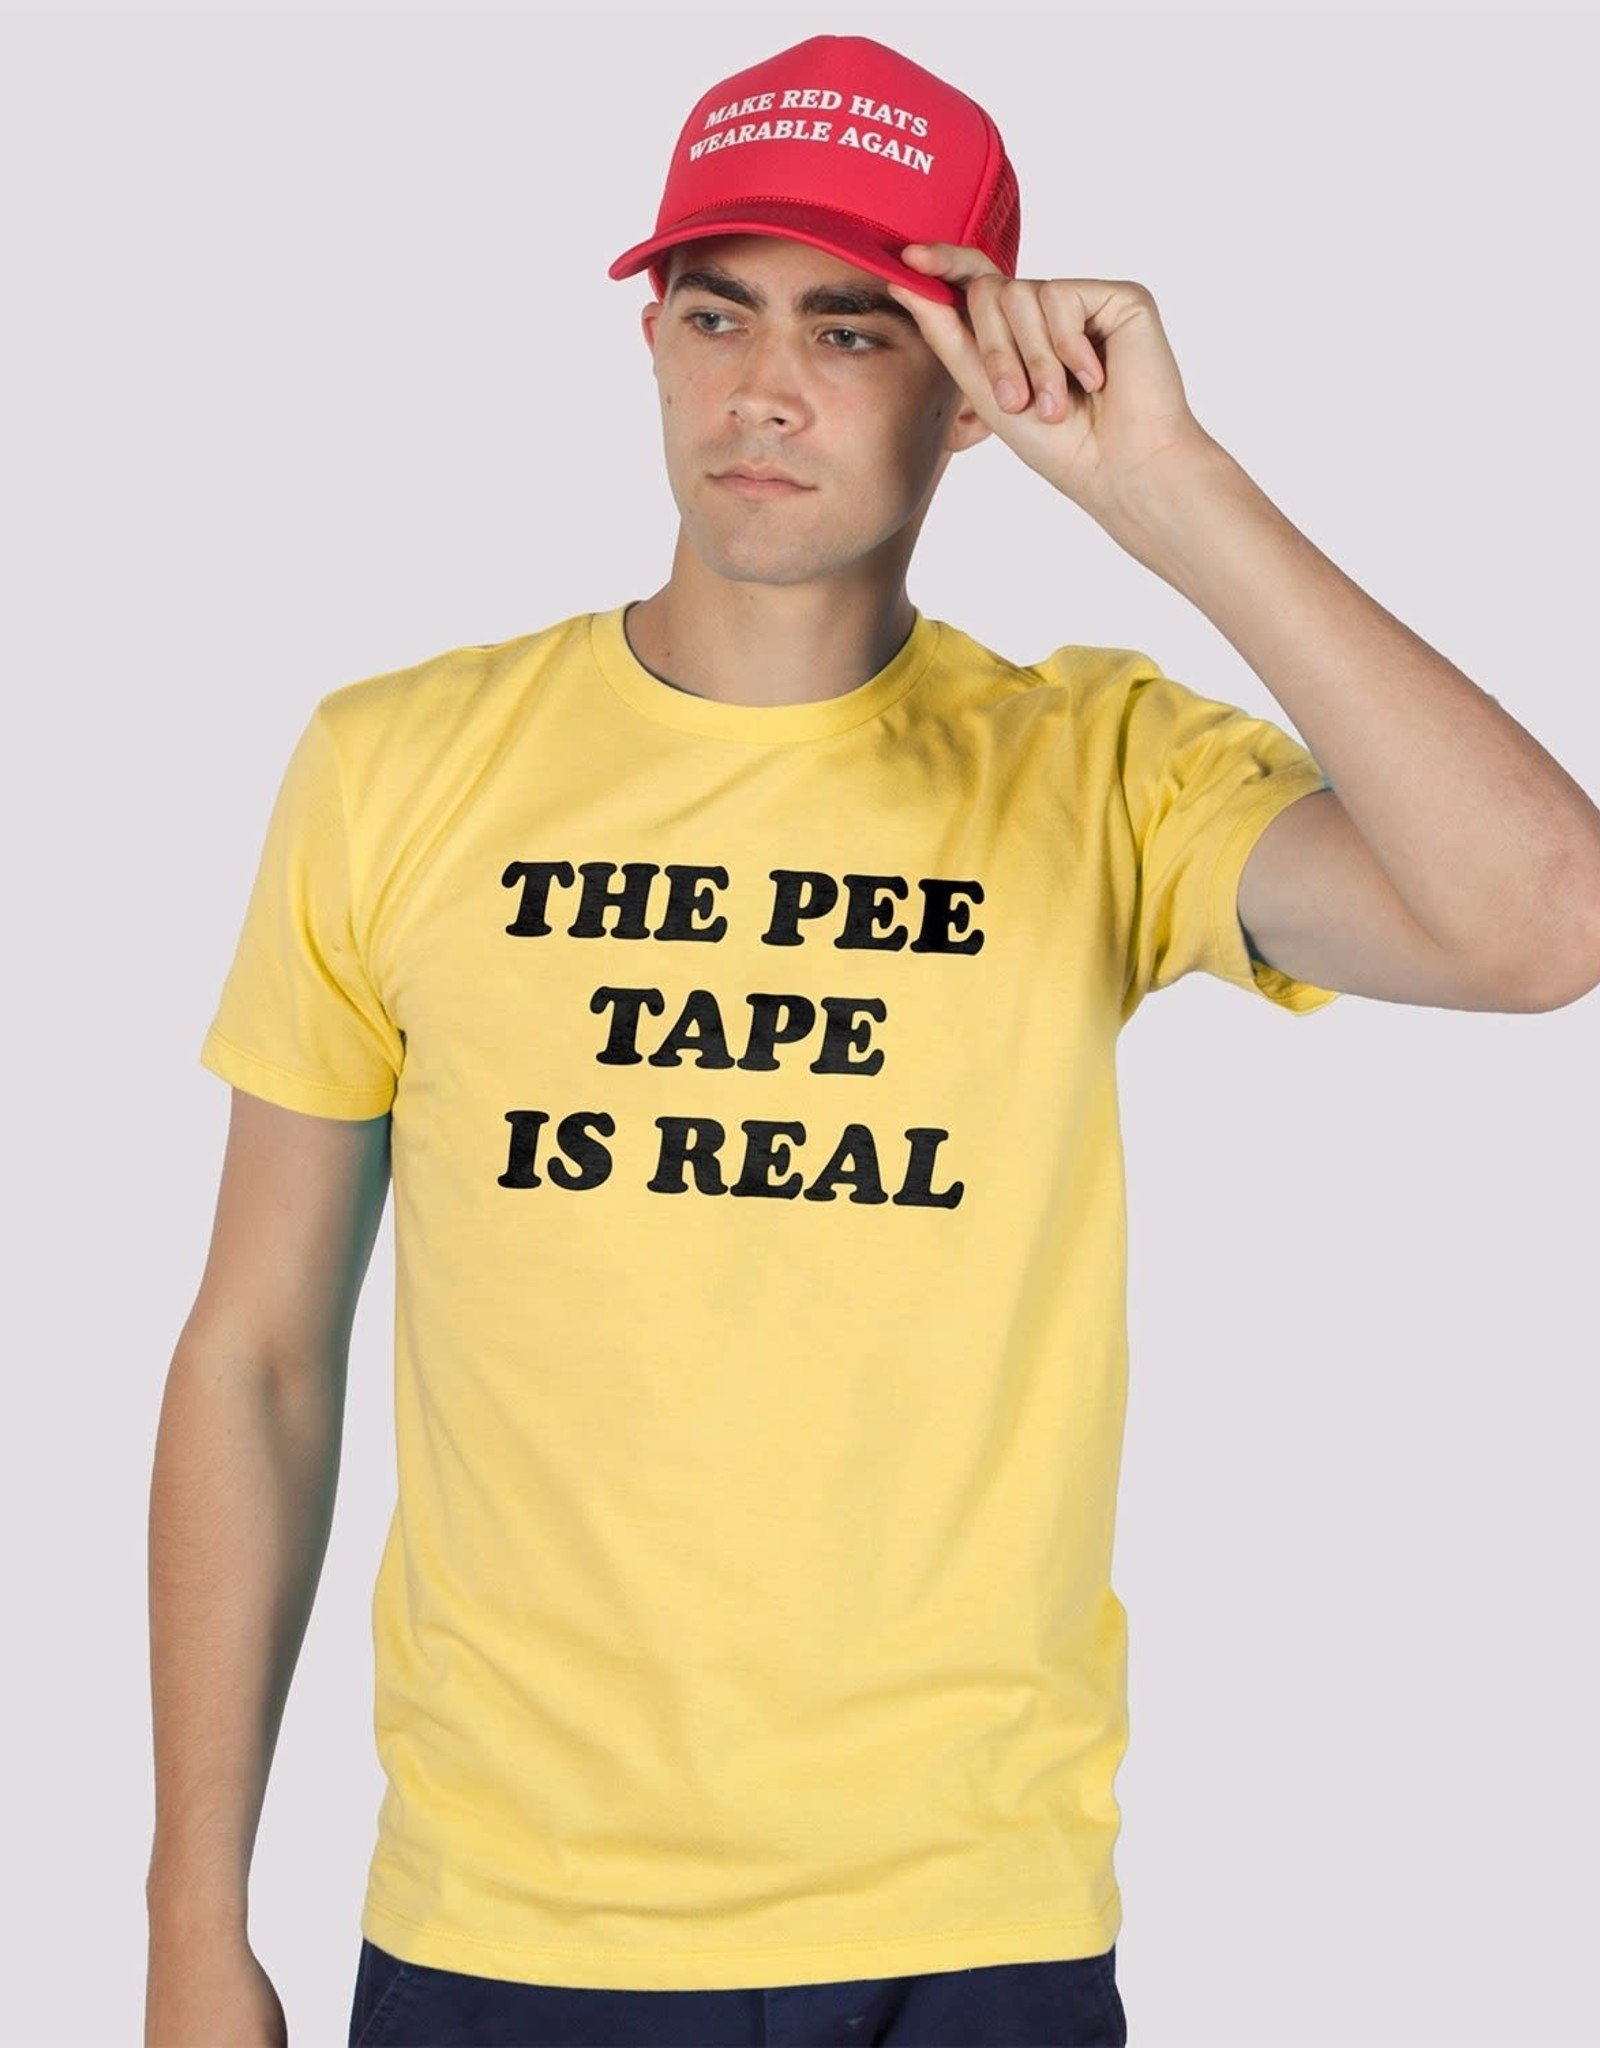 The Pee Tape is Real T-shirt